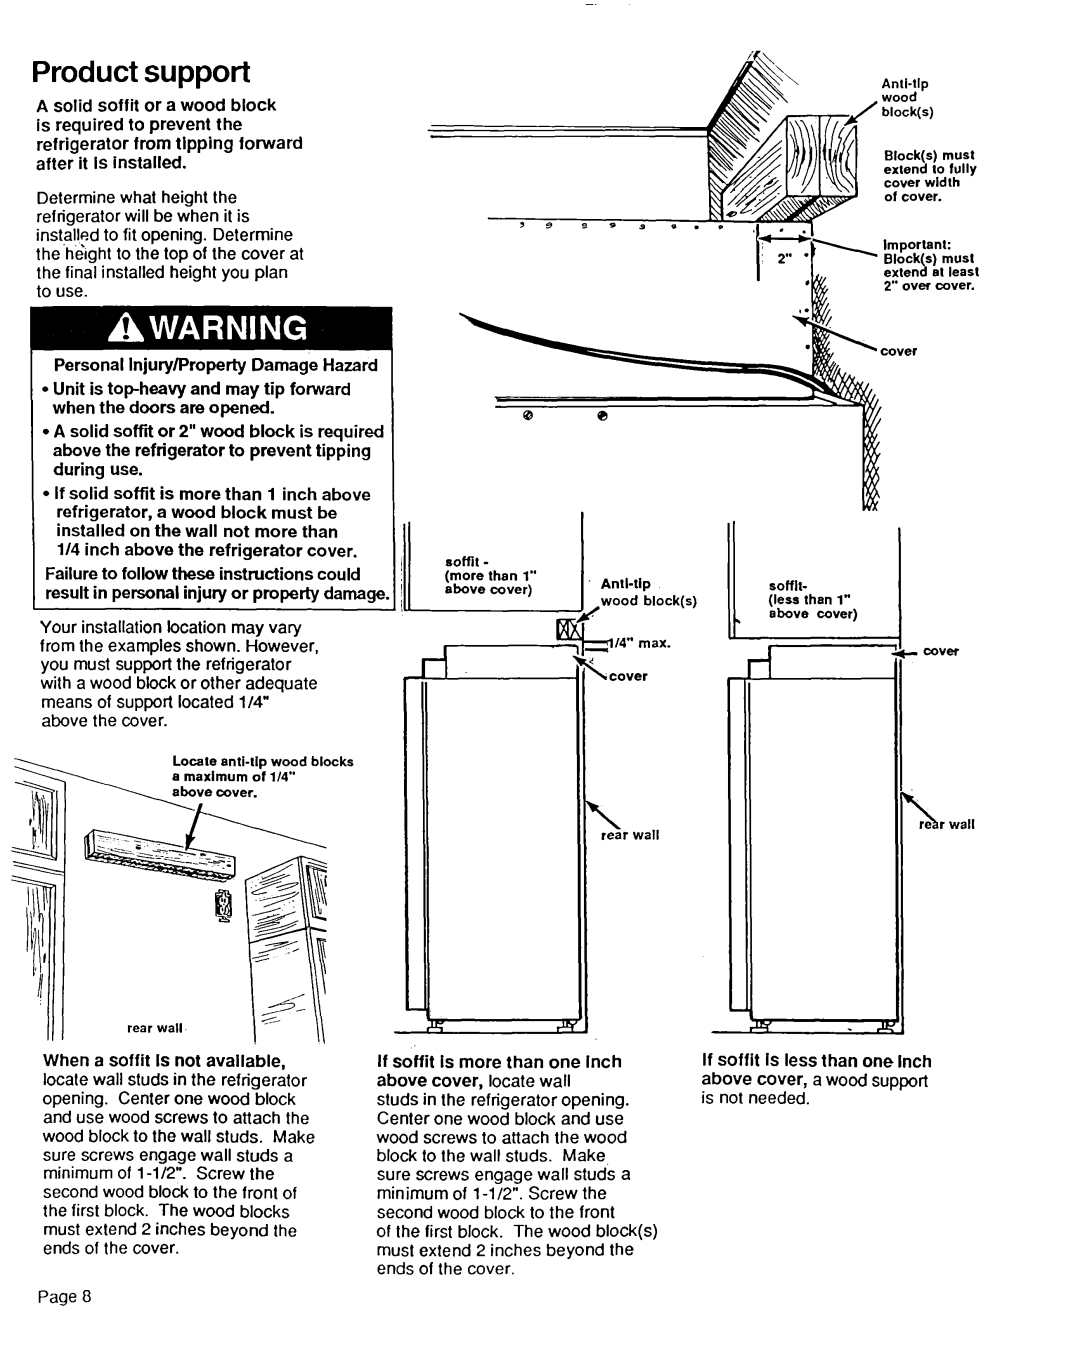 KitchenAid 2000491 installation instructions Product support 